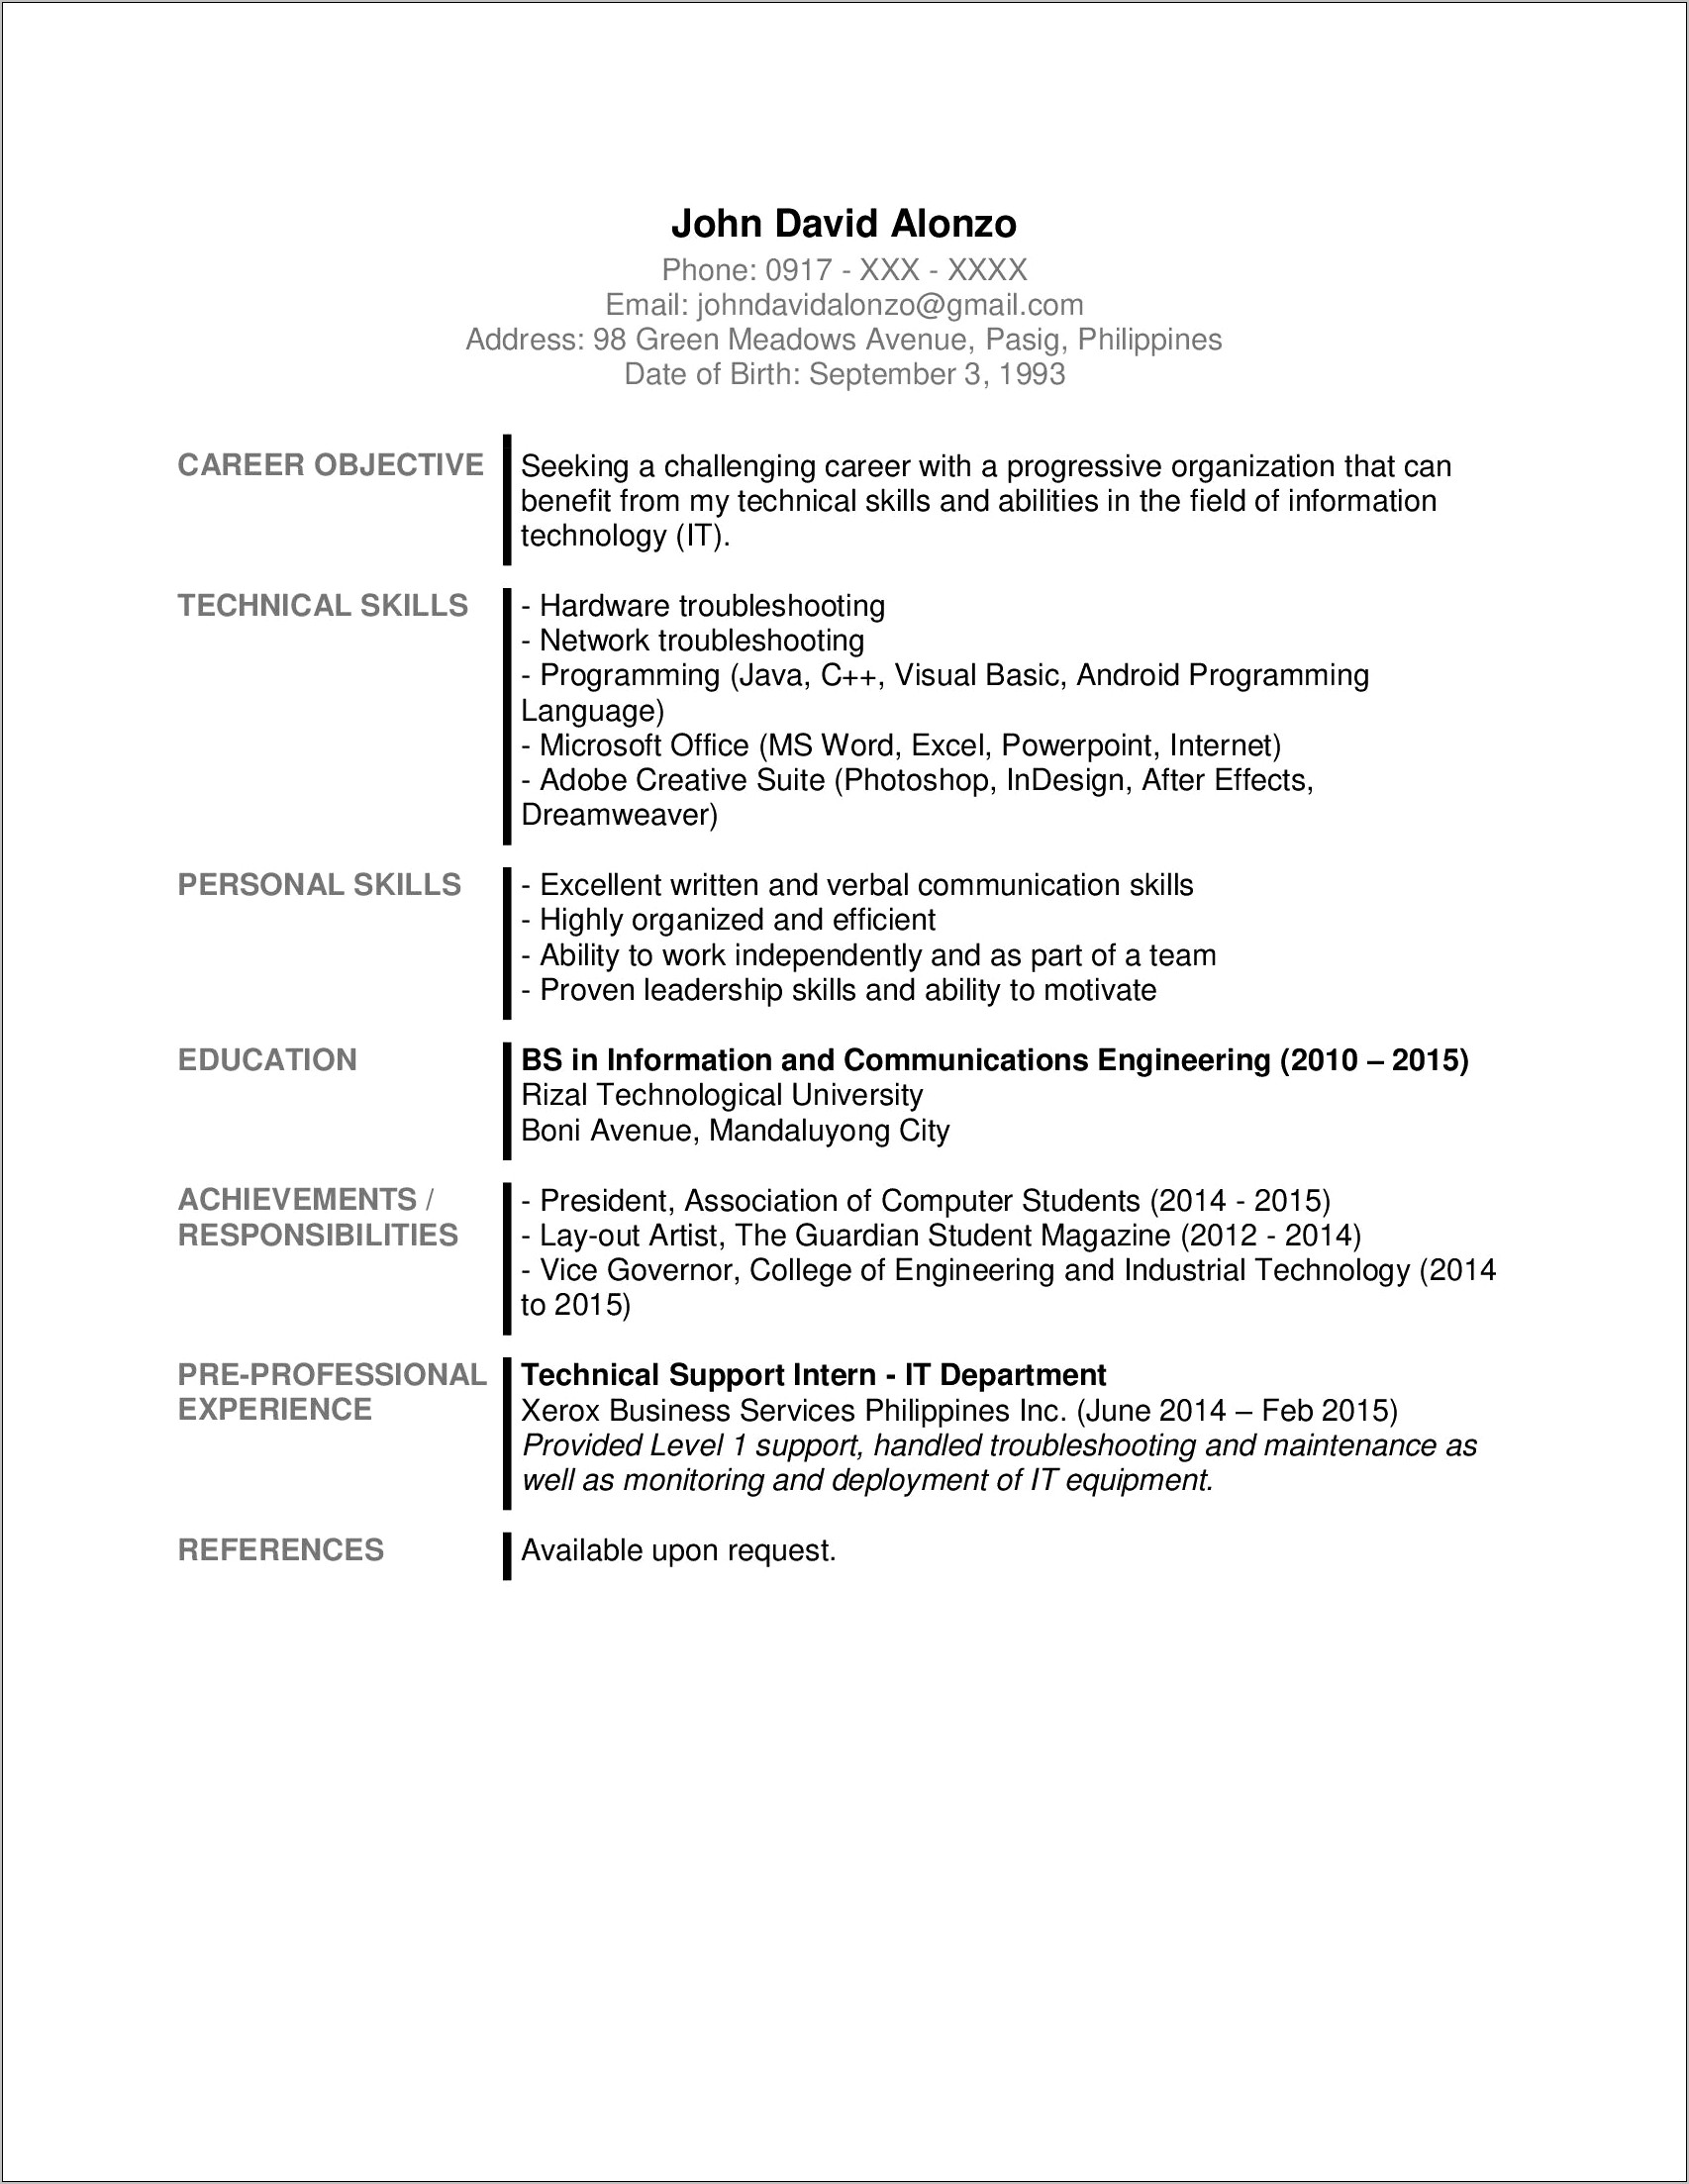 Resume Objective Out Of College